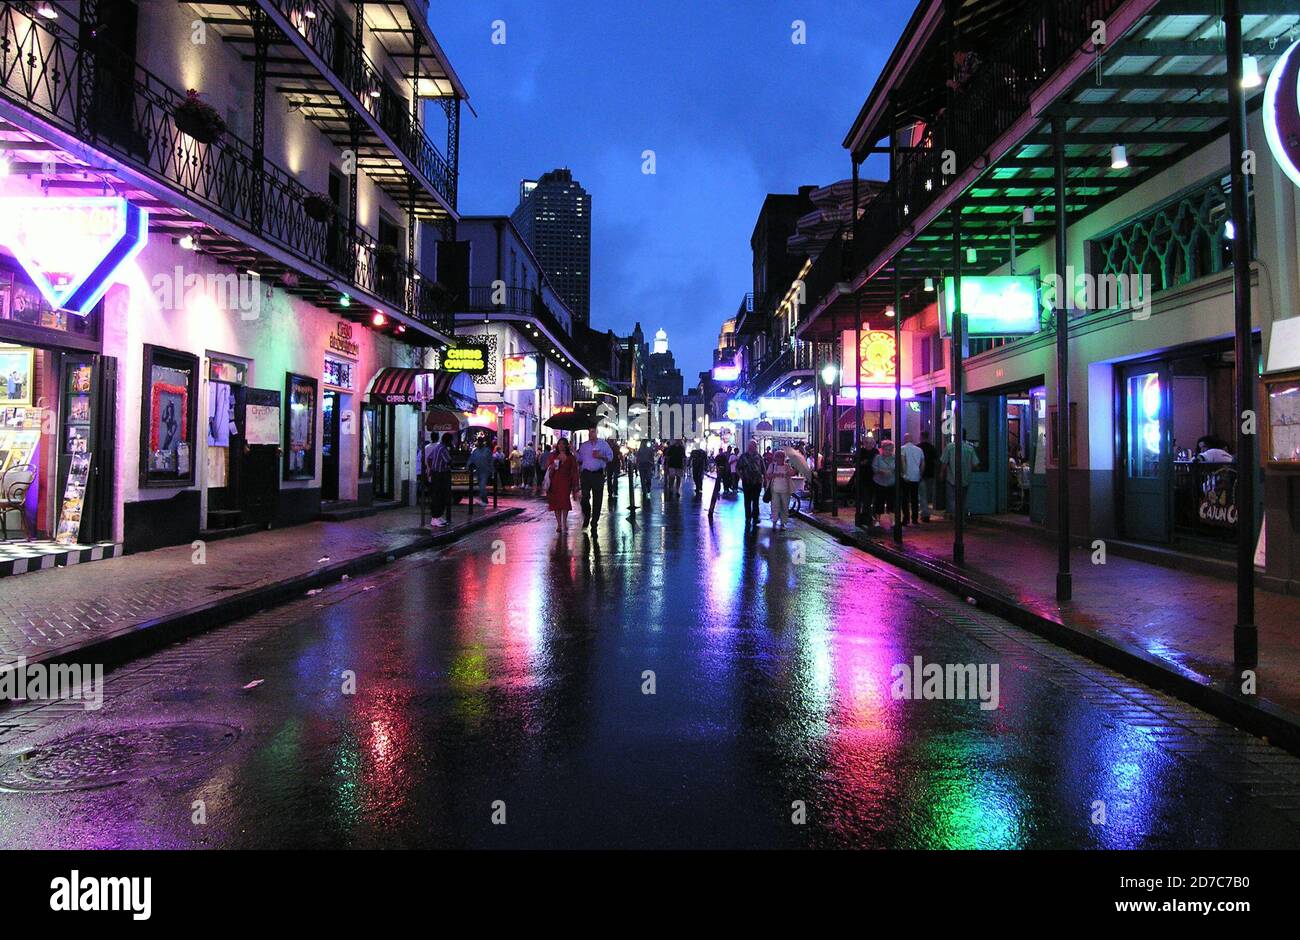 NEW ORLEANS, LOUISIANA, USA - JUNE 5, 2005:  Archival rainy night view of historic Bourbon Street in the French Quarter. Stock Photo